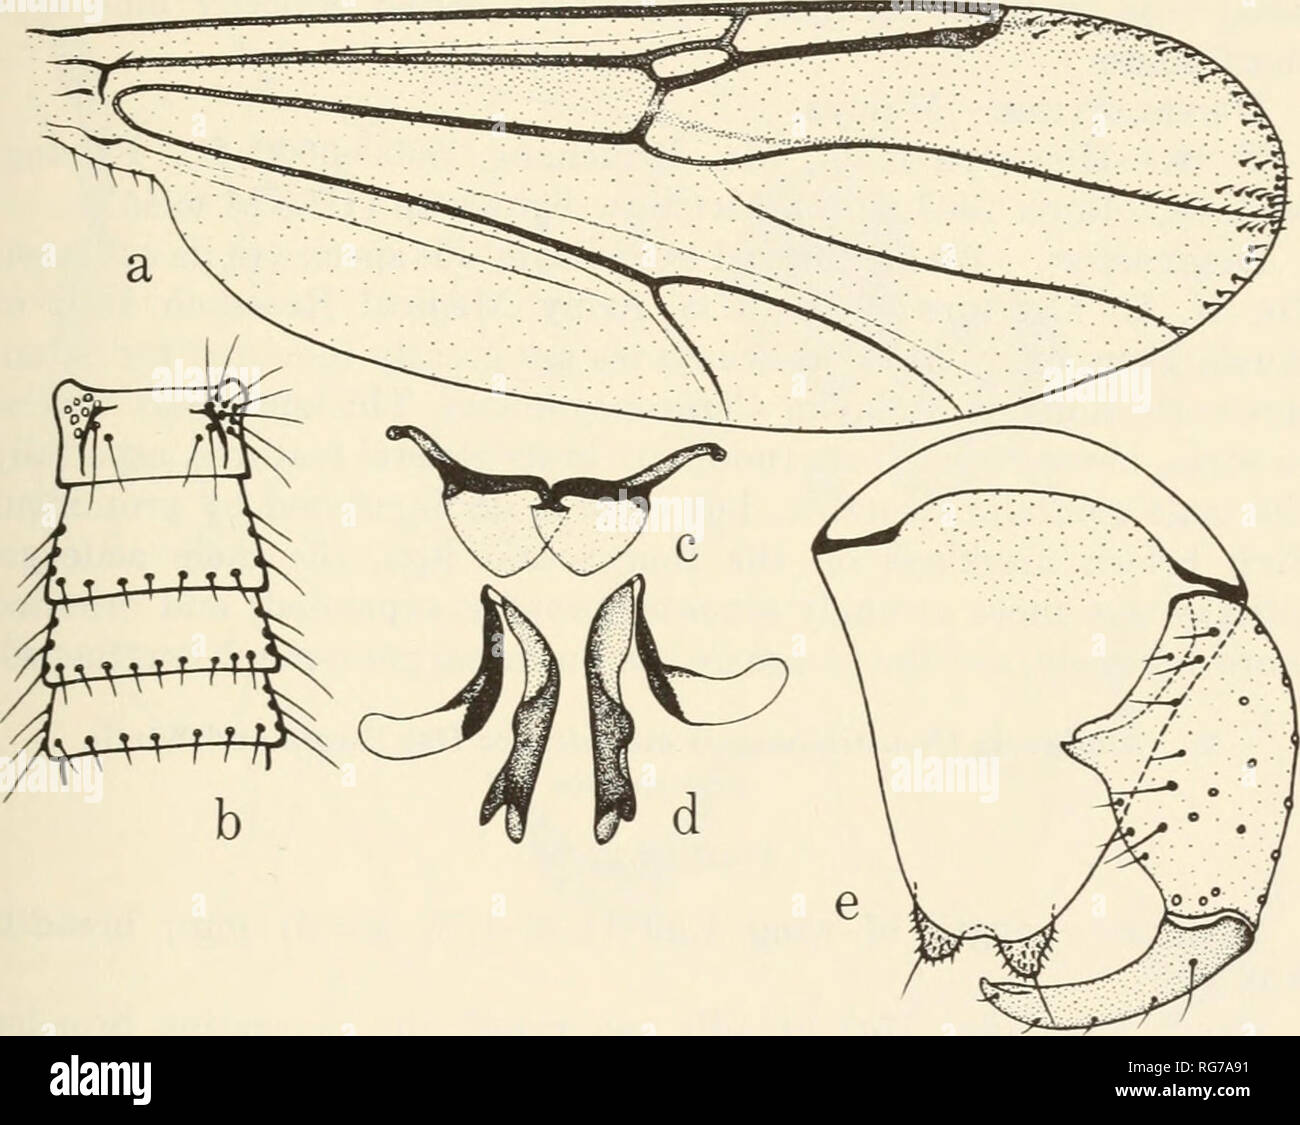 . Bulletin - United States National Museum. Science. REVISION OF SPECIES OF STILOBEZZIA KIEFFER 51 16. Stilobezzia (Neostilobezzia) macclurei Das Gupta and Wirth, new species Figure 56 Female.—Unknown. Male.—Length of wing 1.38 mm. A dull yellowish-brown species, scutum slightly more brownish; legs straw colored, hind femur slightly brownish on distal half. Distal antennomere with terminal bristle; palpal segment III slender, with preapical round pit bearing short sensilla. Scutellum with 4 large bristles. Femora and tibiae with sparse short hairs, 6 long extensor bristles on hind tibia; claws Stock Photo